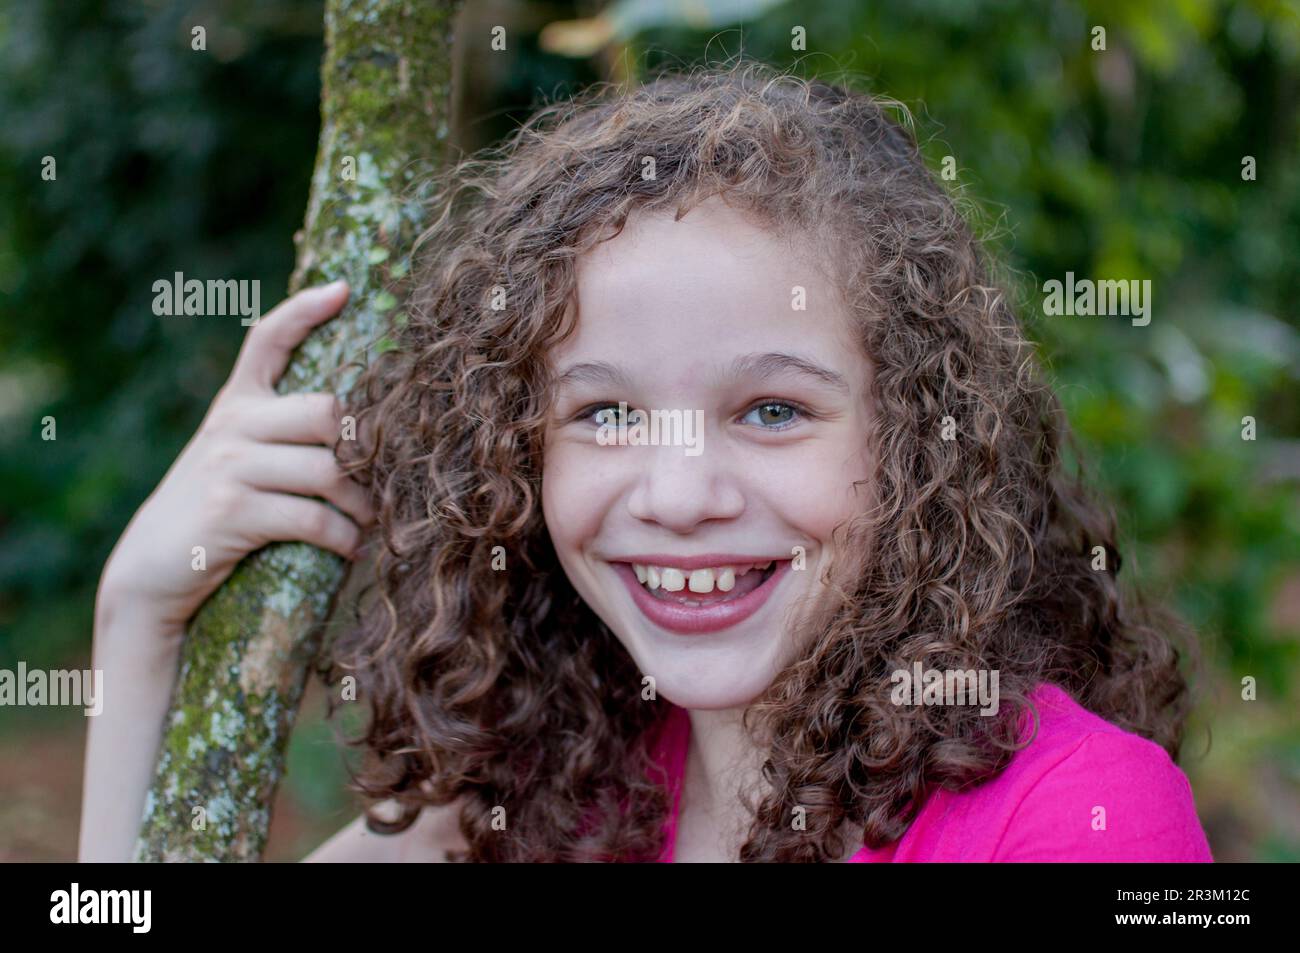 Portrait of curly girl smiling at camera Stock Photo